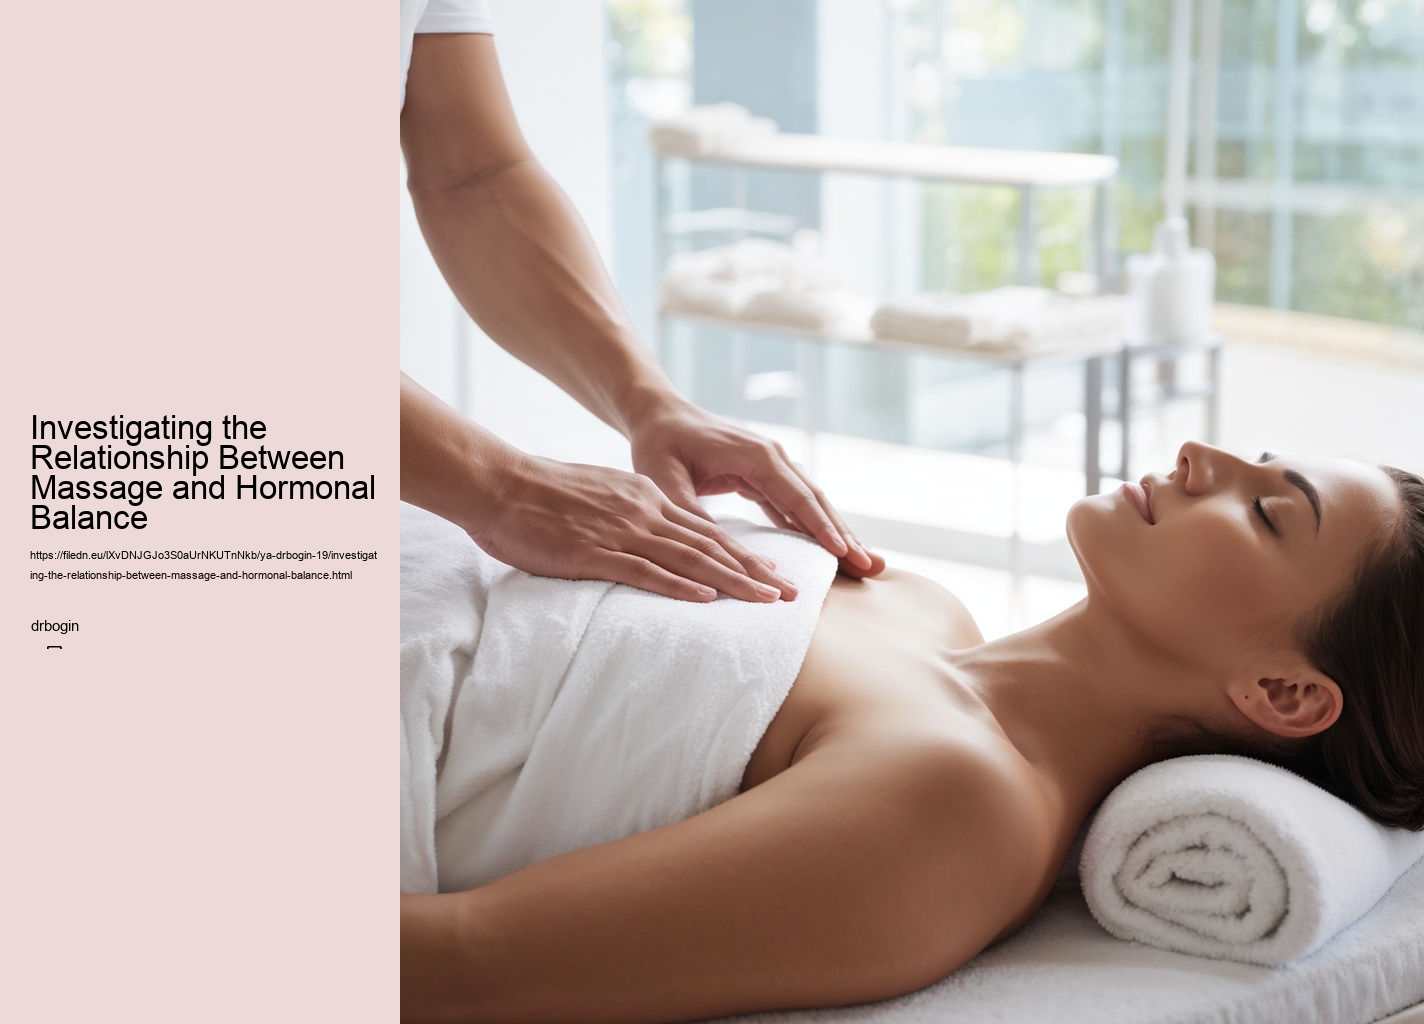 Investigating the Relationship Between Massage and Hormonal Balance